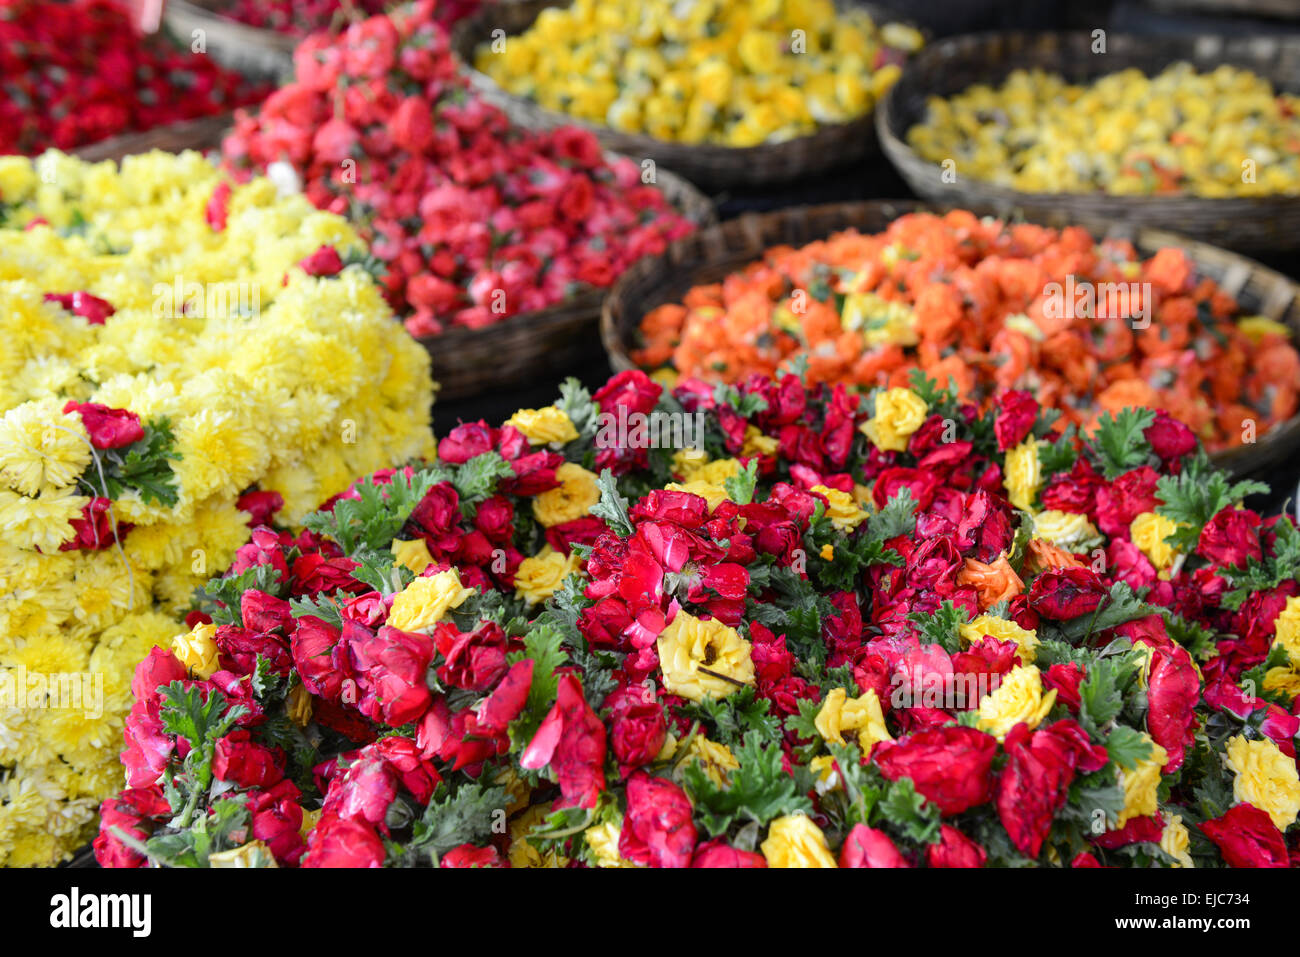 Roses for Sale at Indian Flower Market Stock Photo